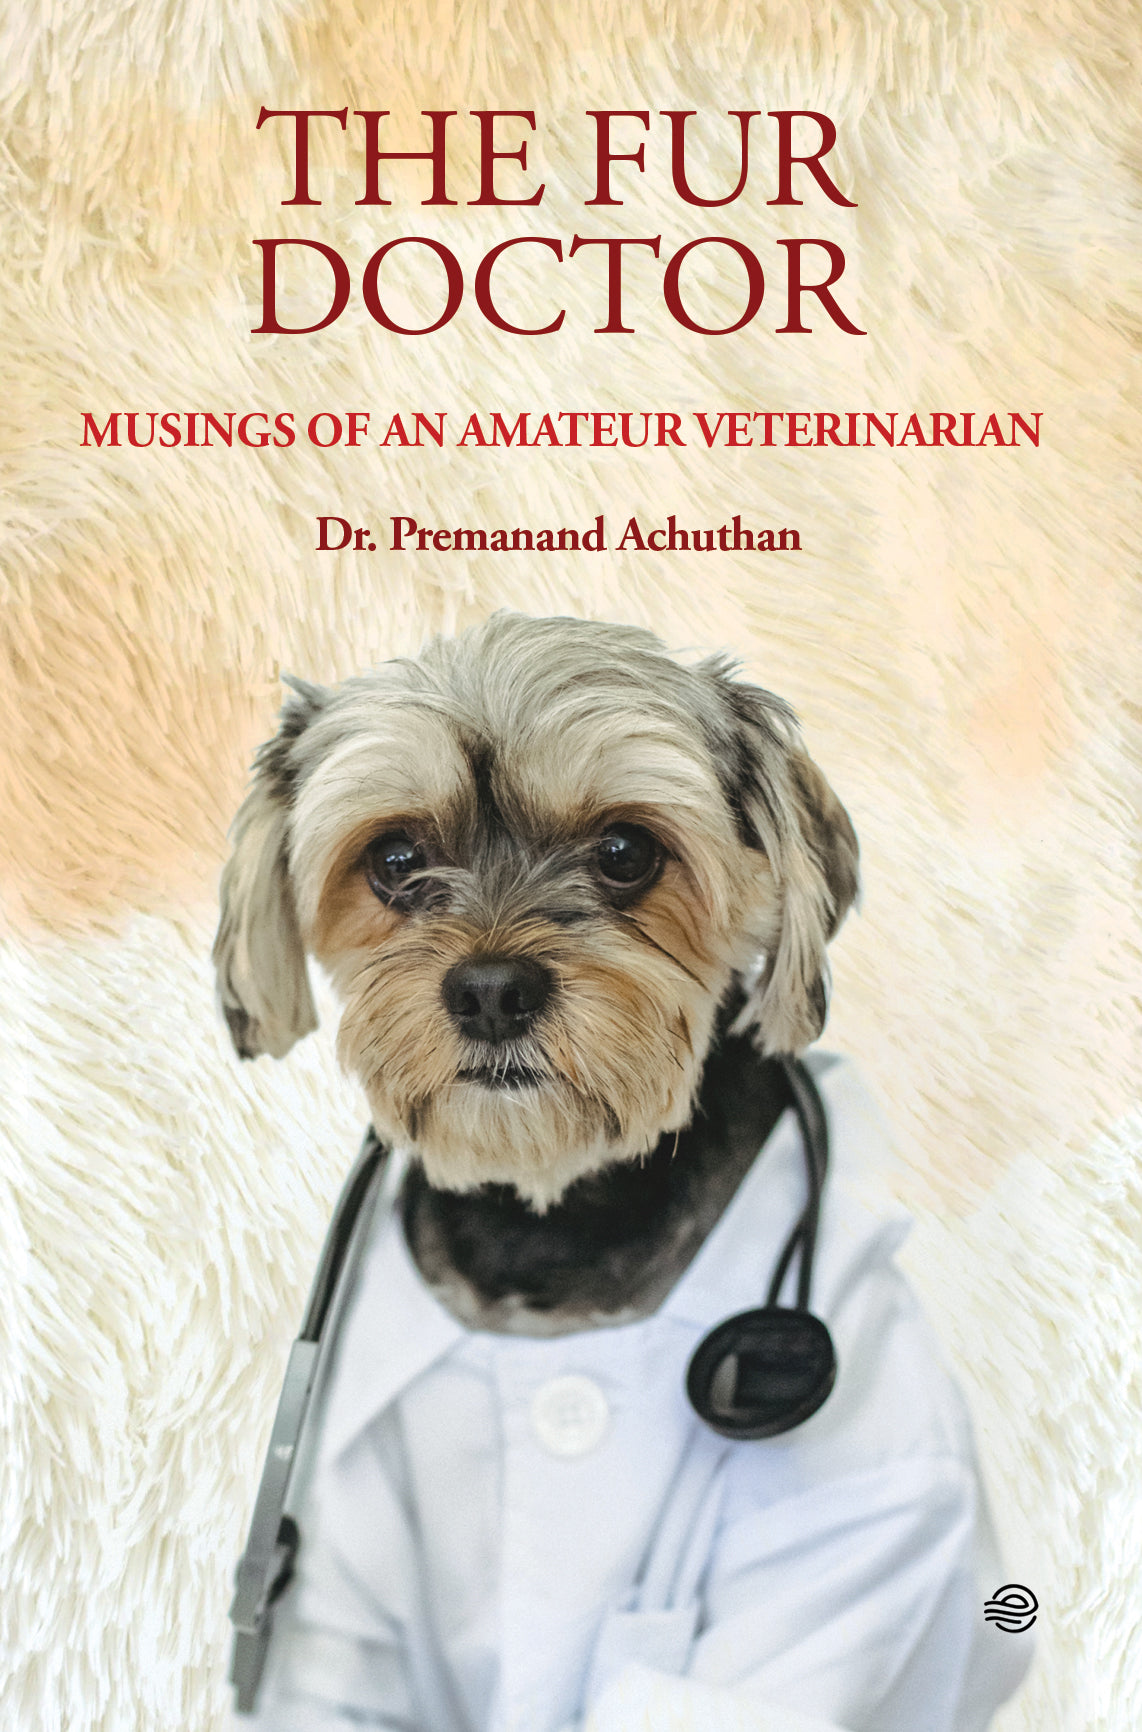 THE FUR DOCTOR-Dr.Premanand Achuthan